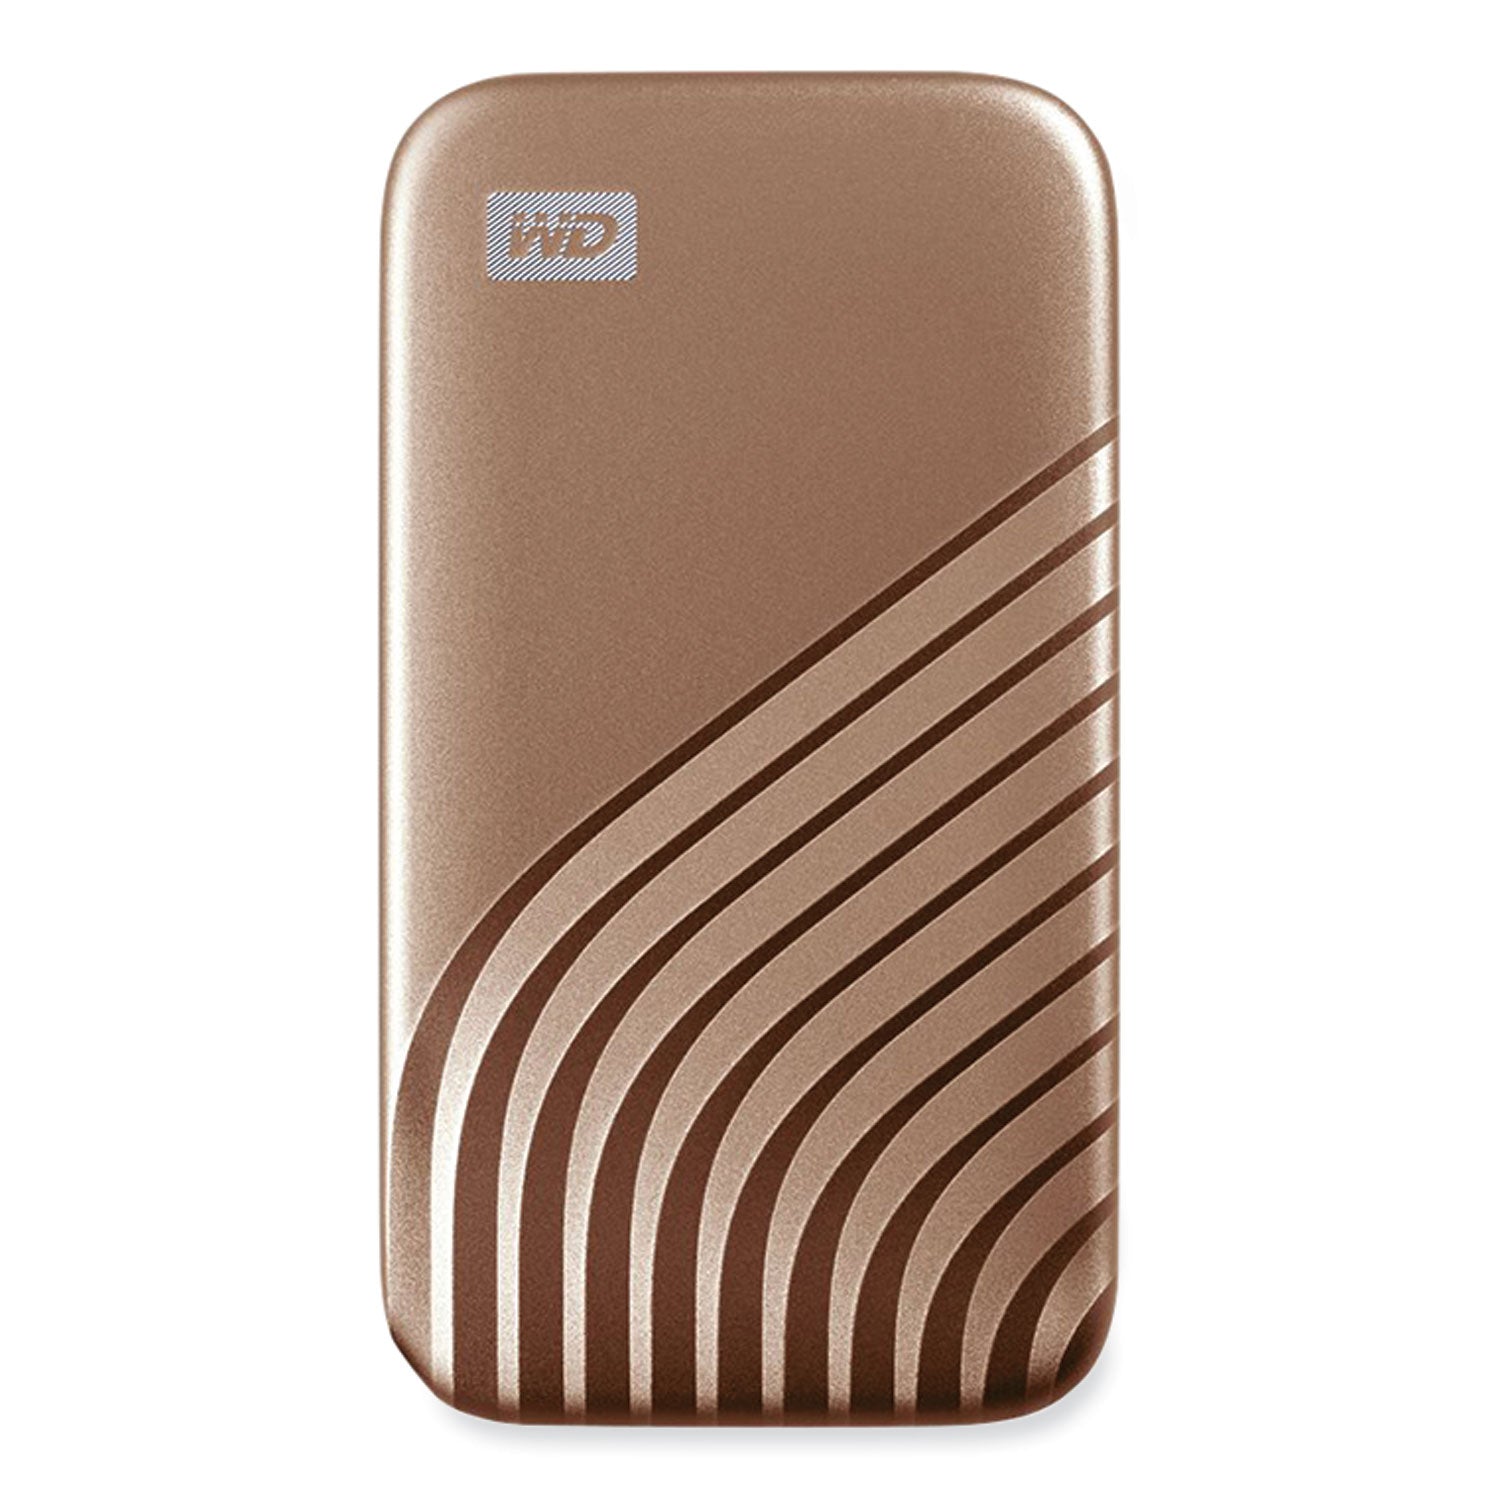 my-passport-external-solid-state-drive-1-tb-usb-32-gold_wdcagf0010bgd - 1